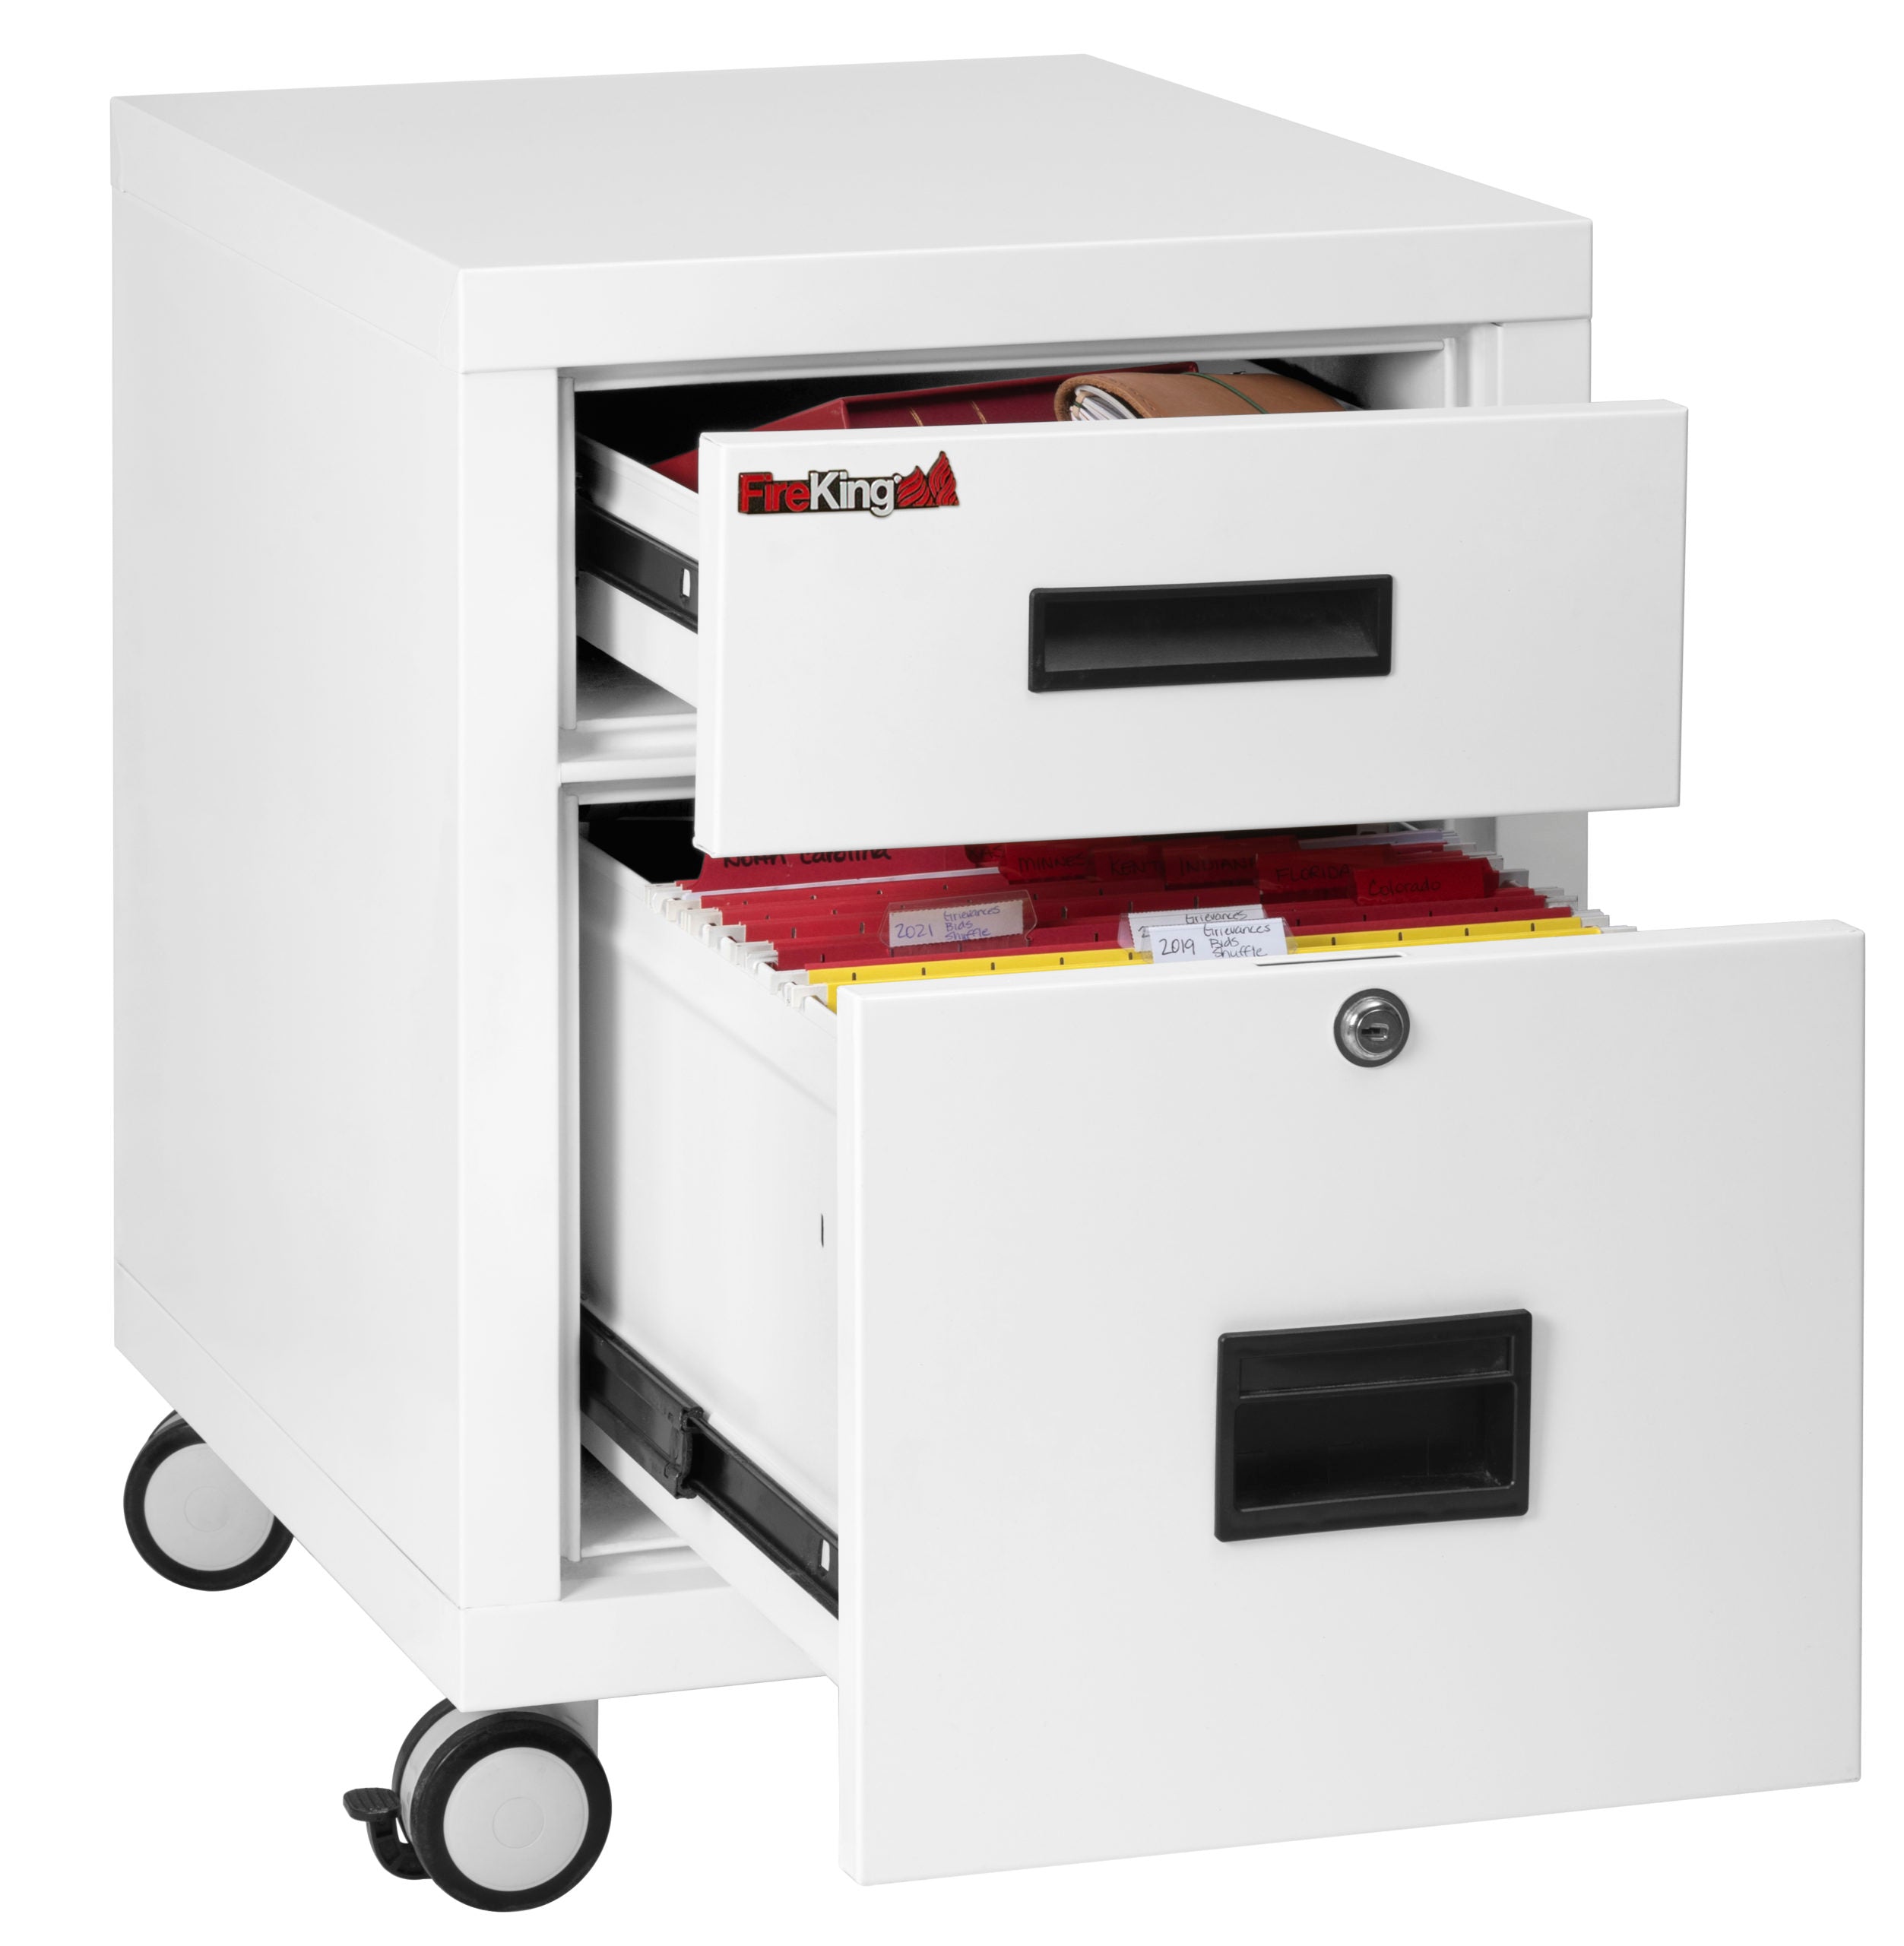 Mobile Base and Caster Kit for Modular Cabinets